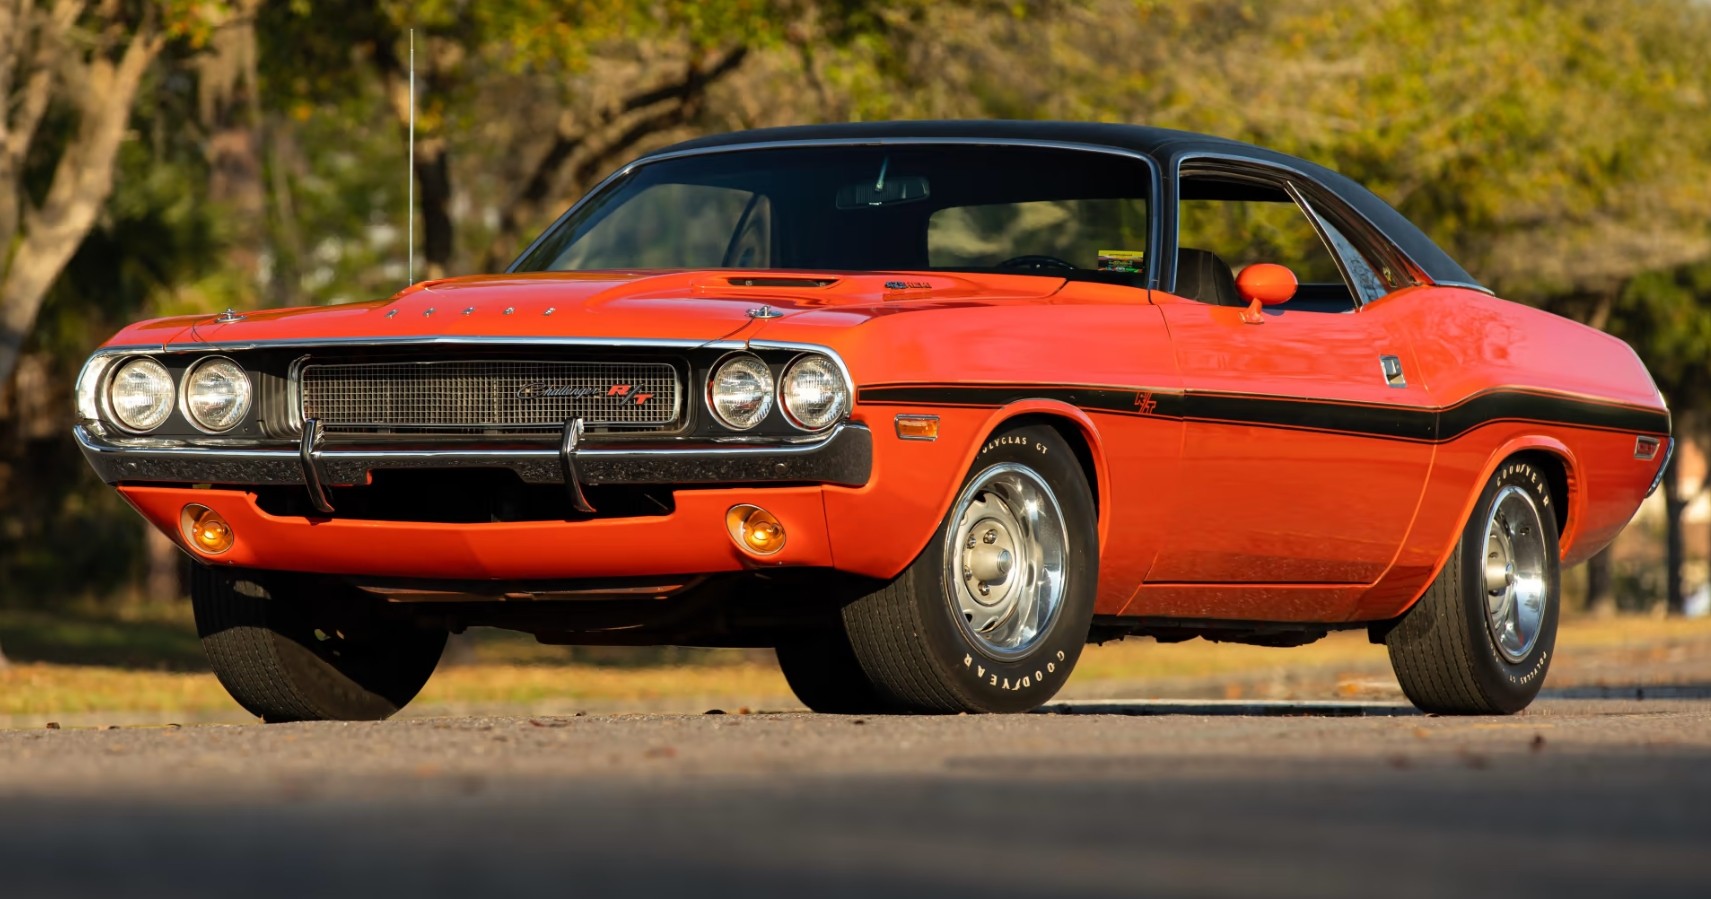 The 10 Best Dodge Models of All Time (Part 5 of the Top 50 Dodge Series)